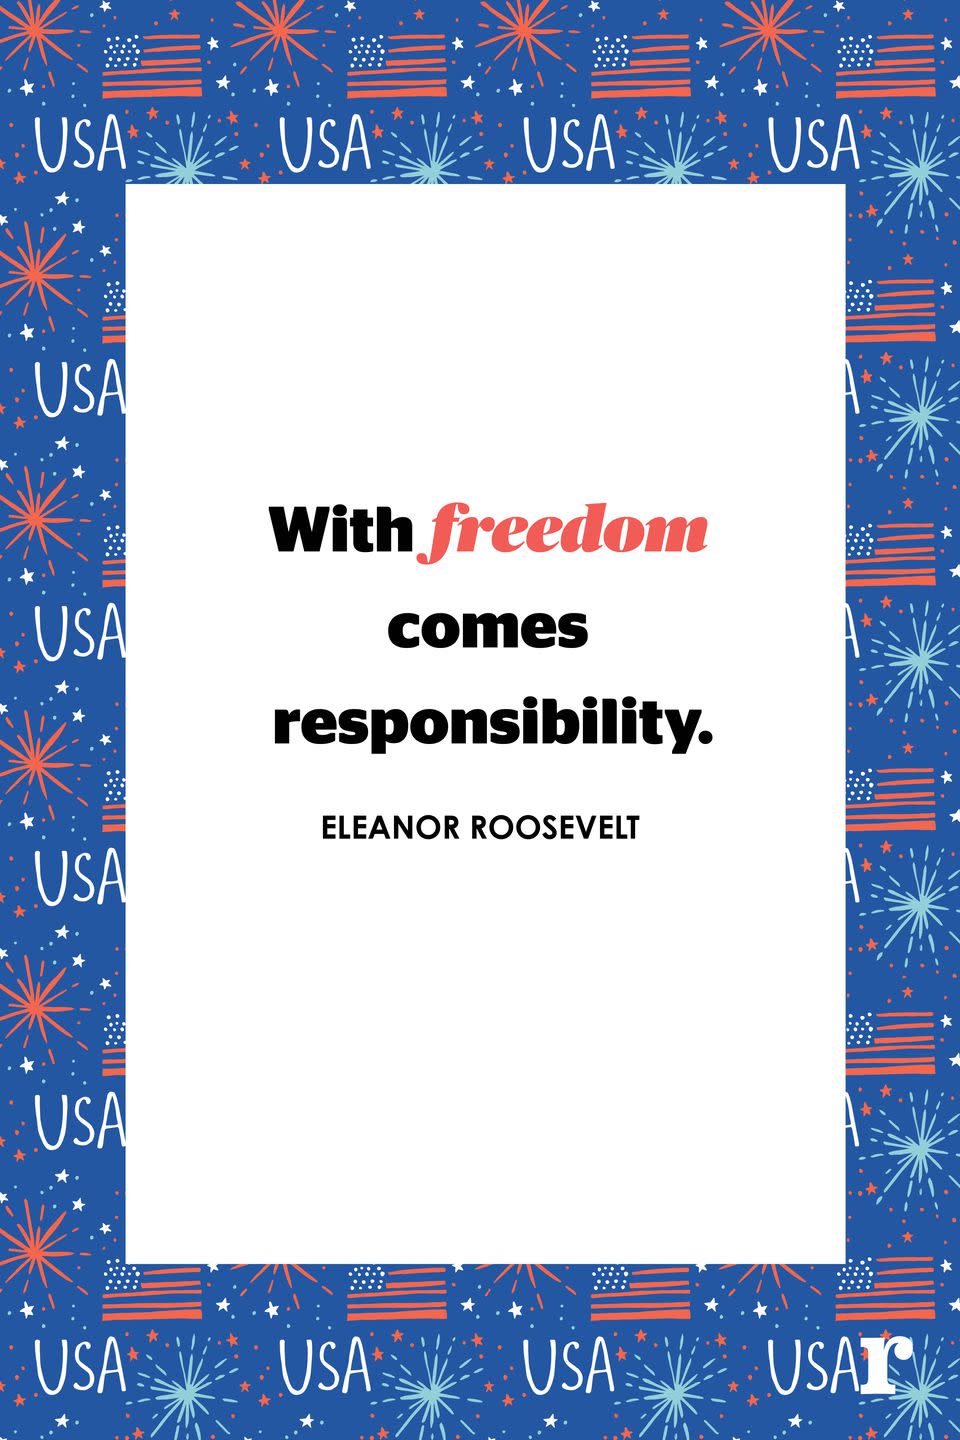 <p>"With freedom comes responsibility."</p>